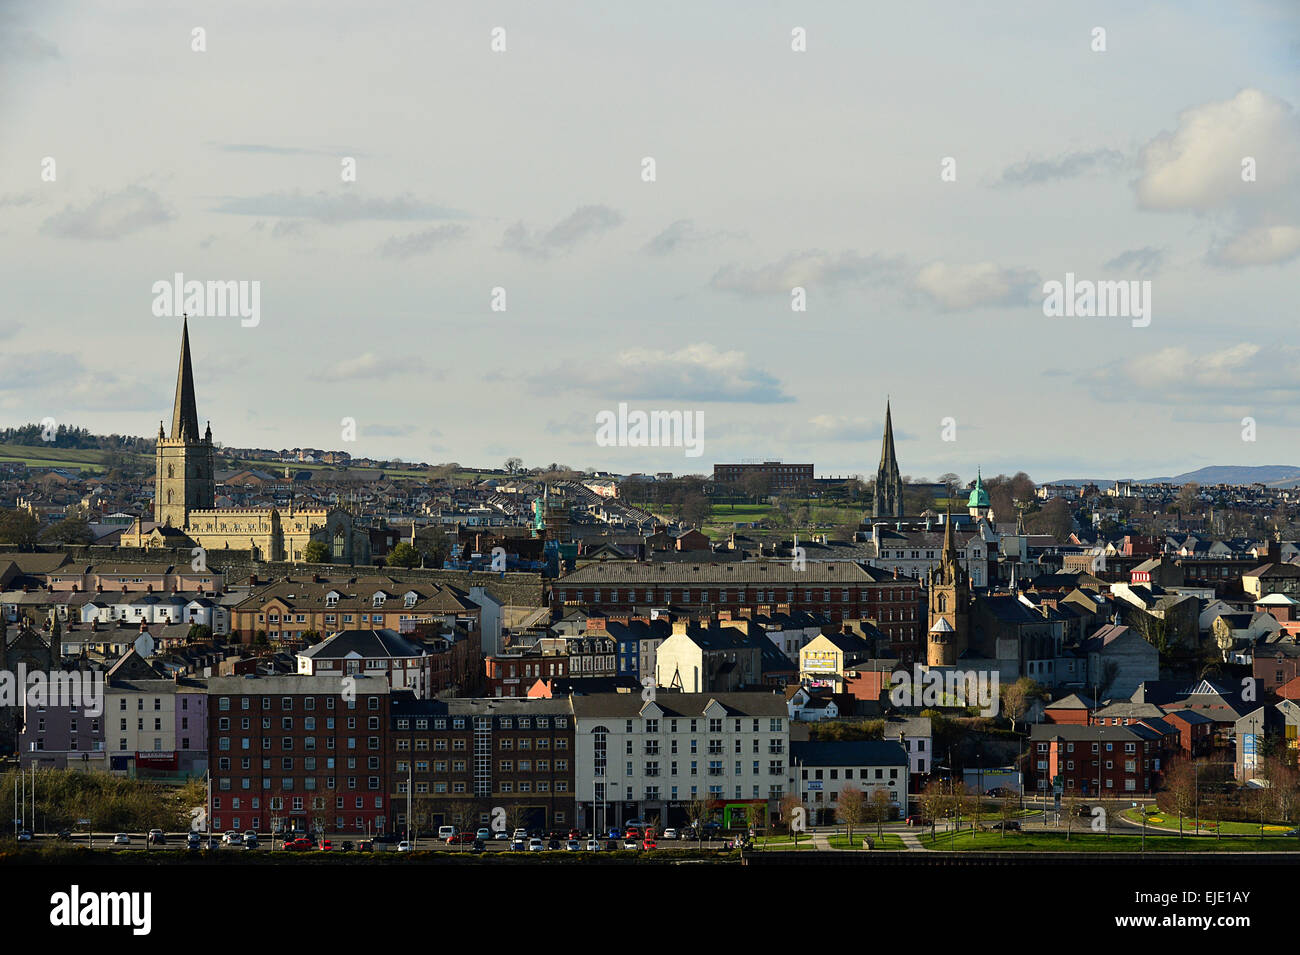 Londonderry, Derry, skyline, cathedrals and church. Stock Photo